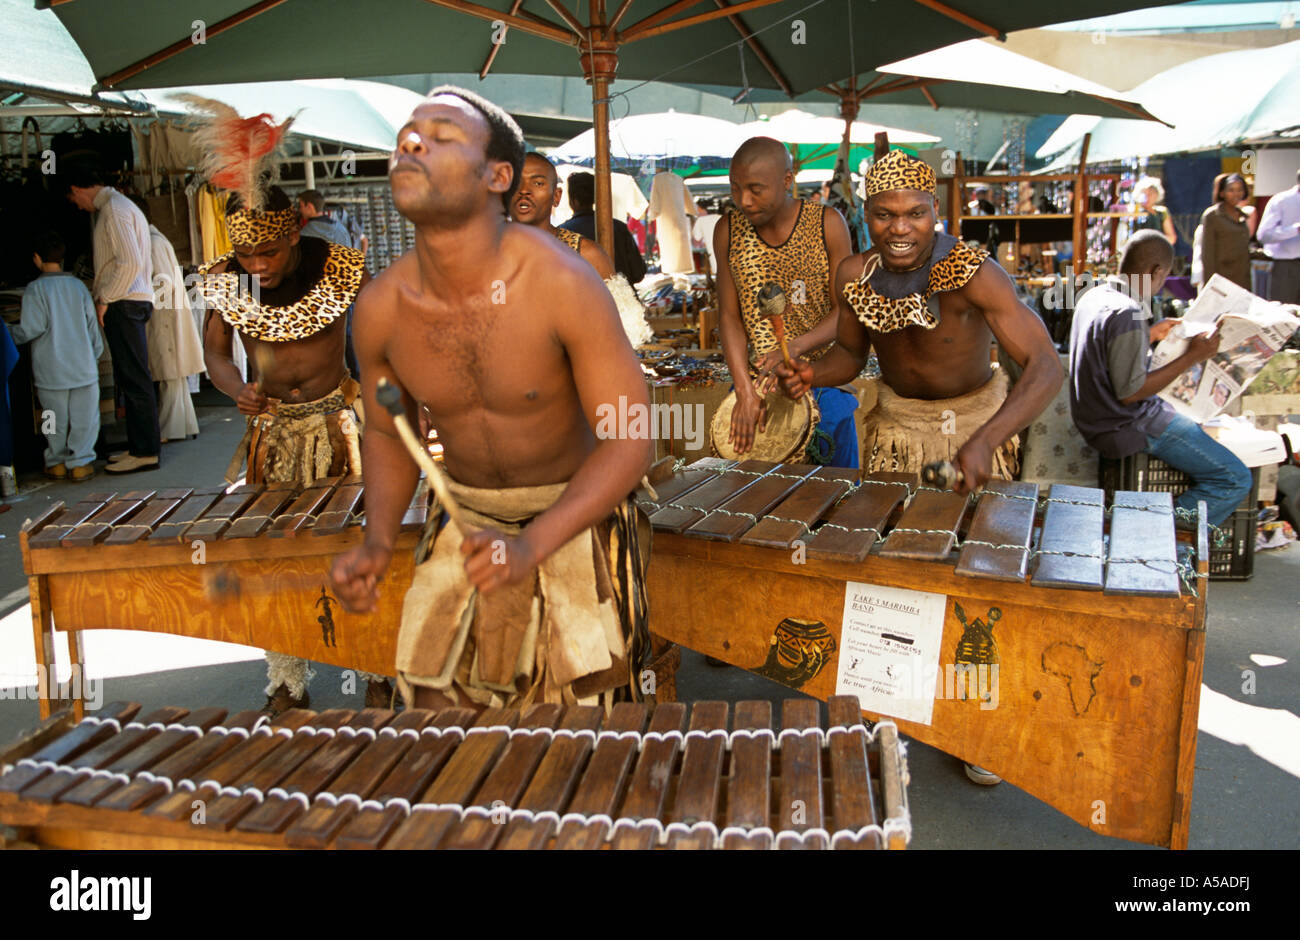 Native South Africans performing on the streets of Johannesburg Stock Photo